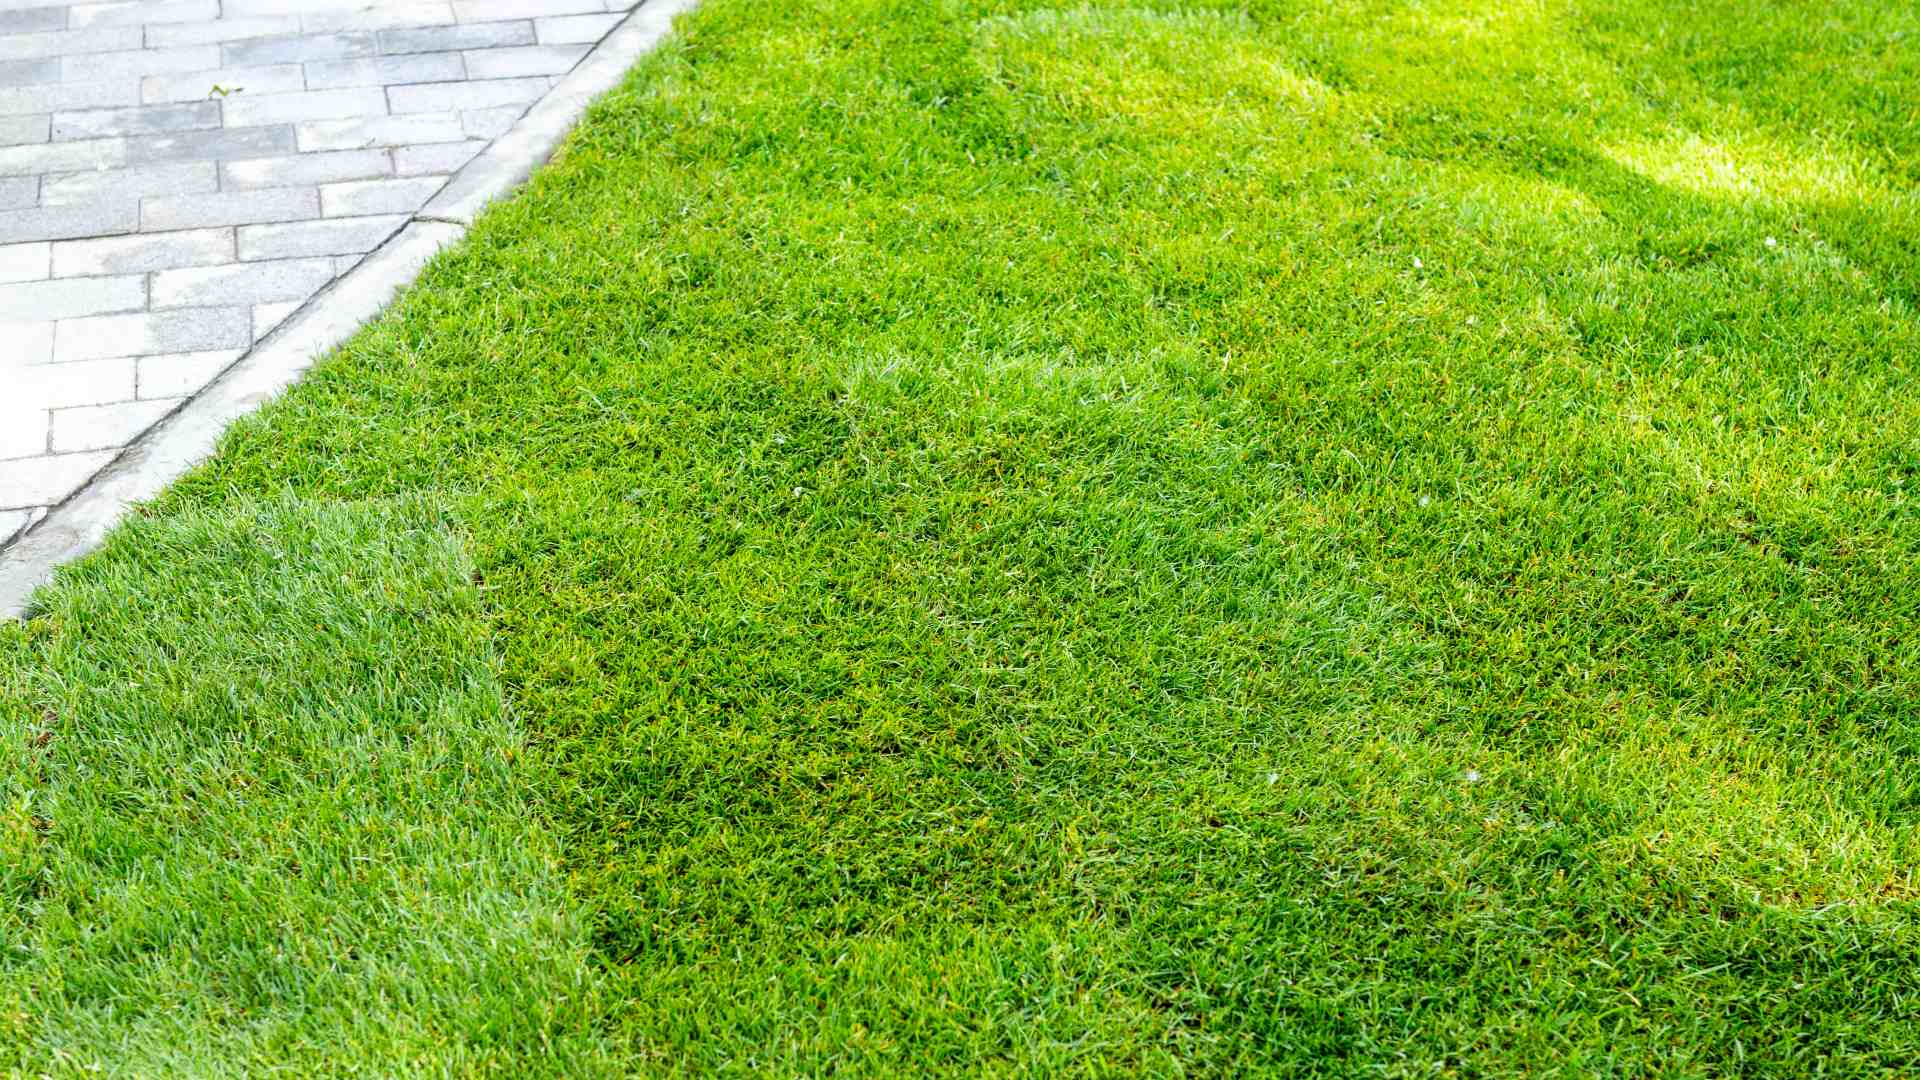 Get an Instantly Green Lawn Thanks to Sod